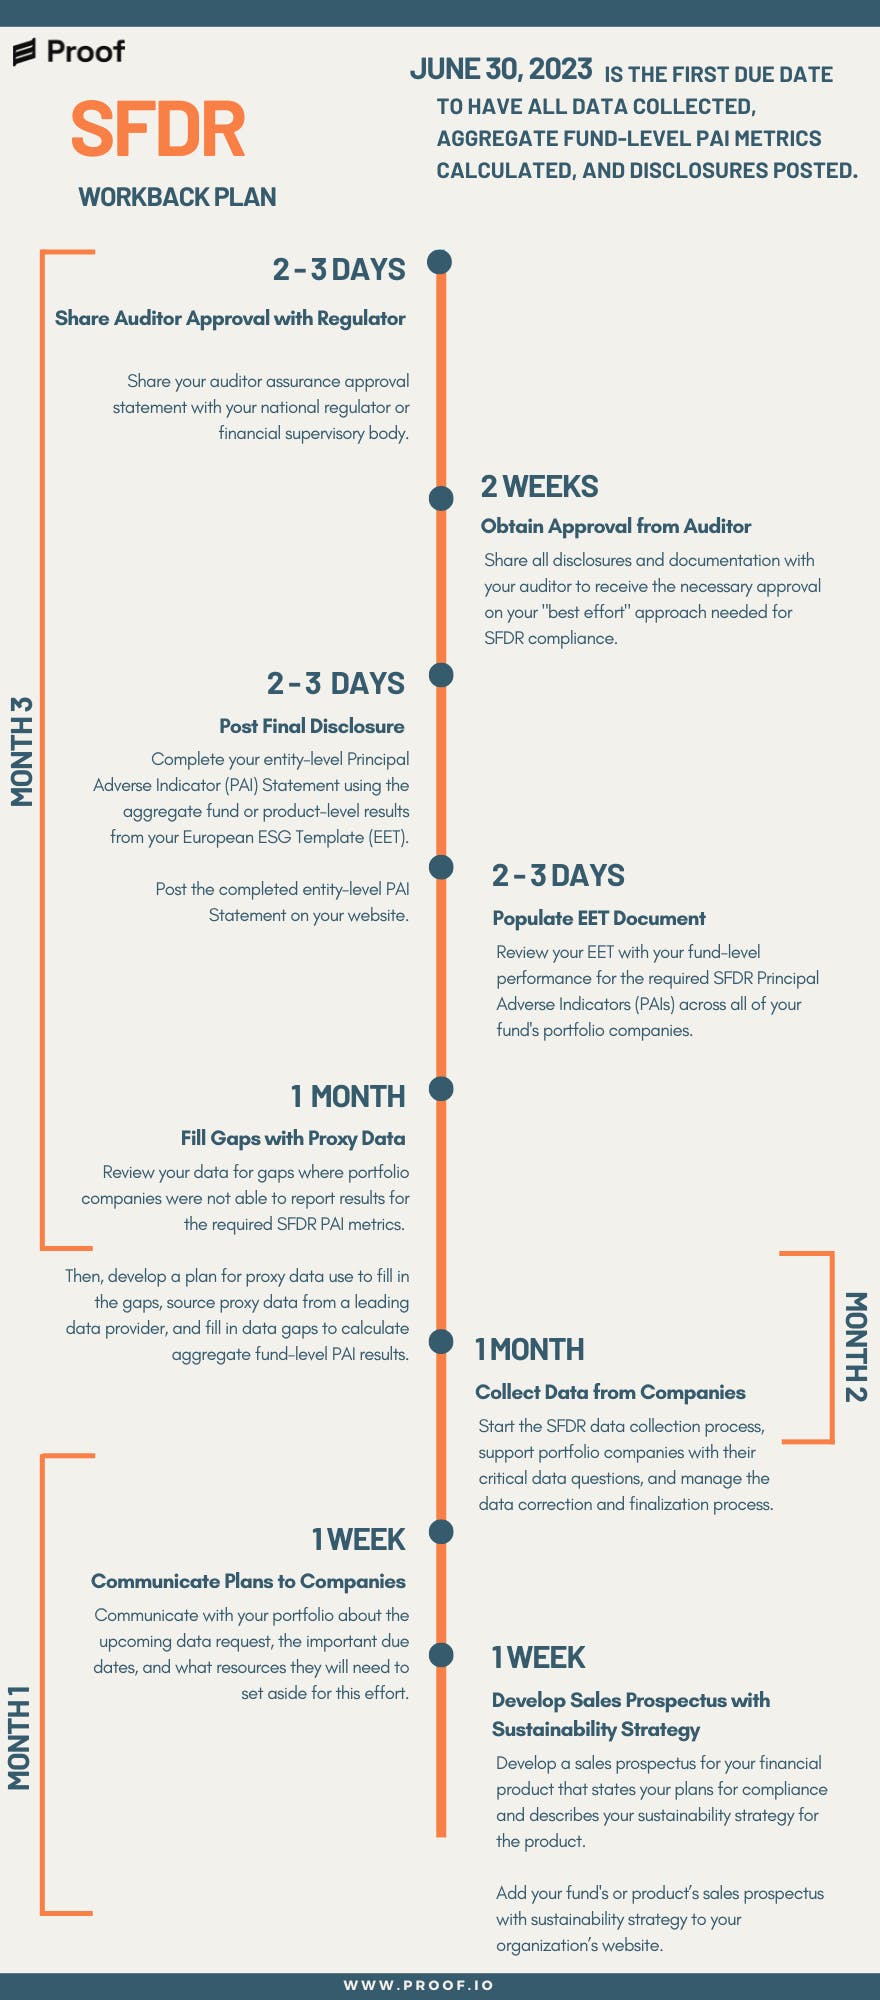 Proof's timeline and workback plan, detailing key dates prior to the June 30, 2023, SFDR deadline